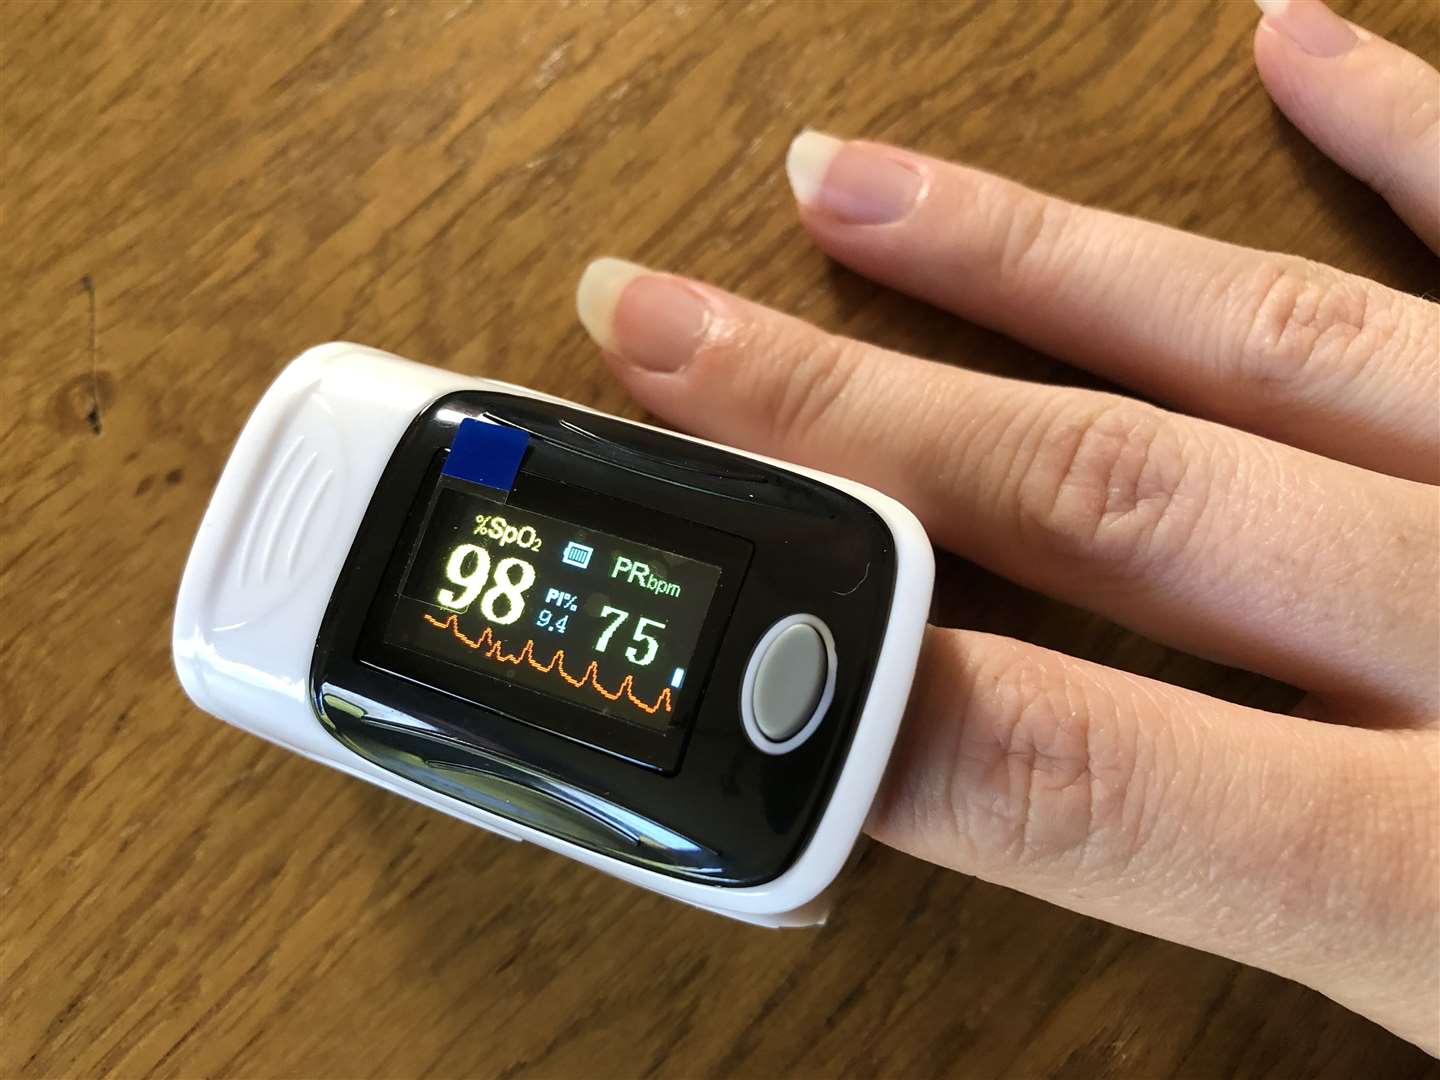 A pulse oximeter which is placed on the finger to monitor the oxygen saturation in blood.